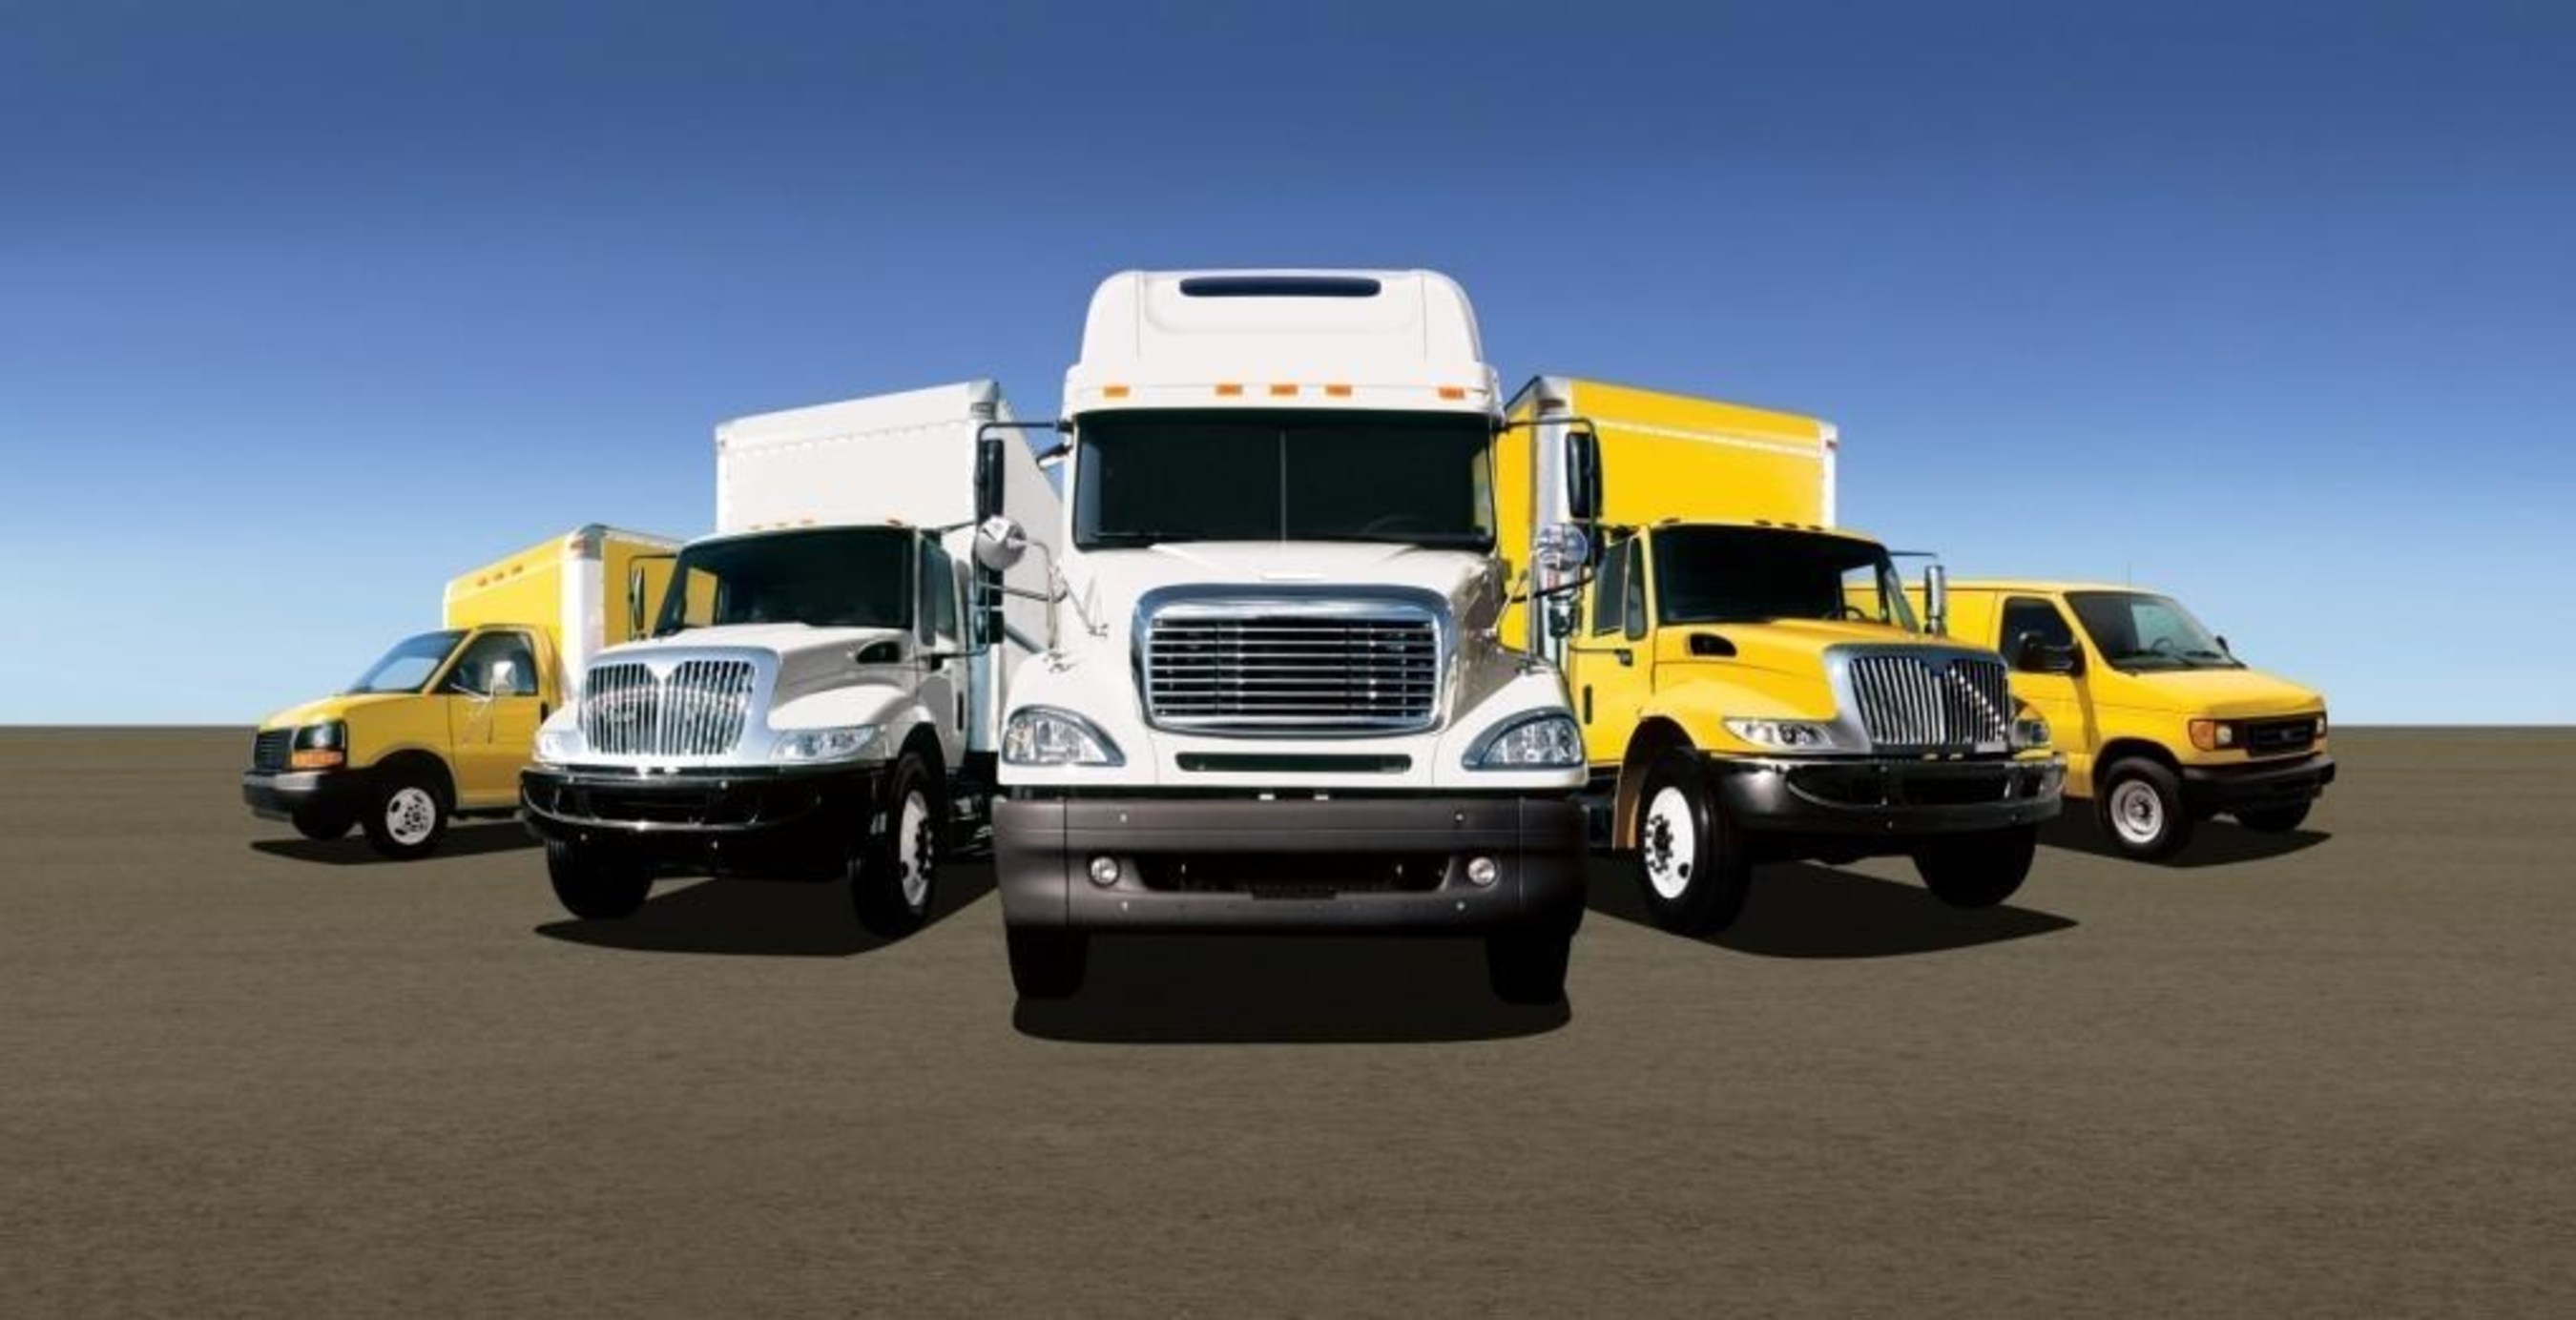 Penske Used Trucks has doubled its commercial truck dealership footprint in North America, introducing centers in Dallas, metro Atlanta and in Ontario.